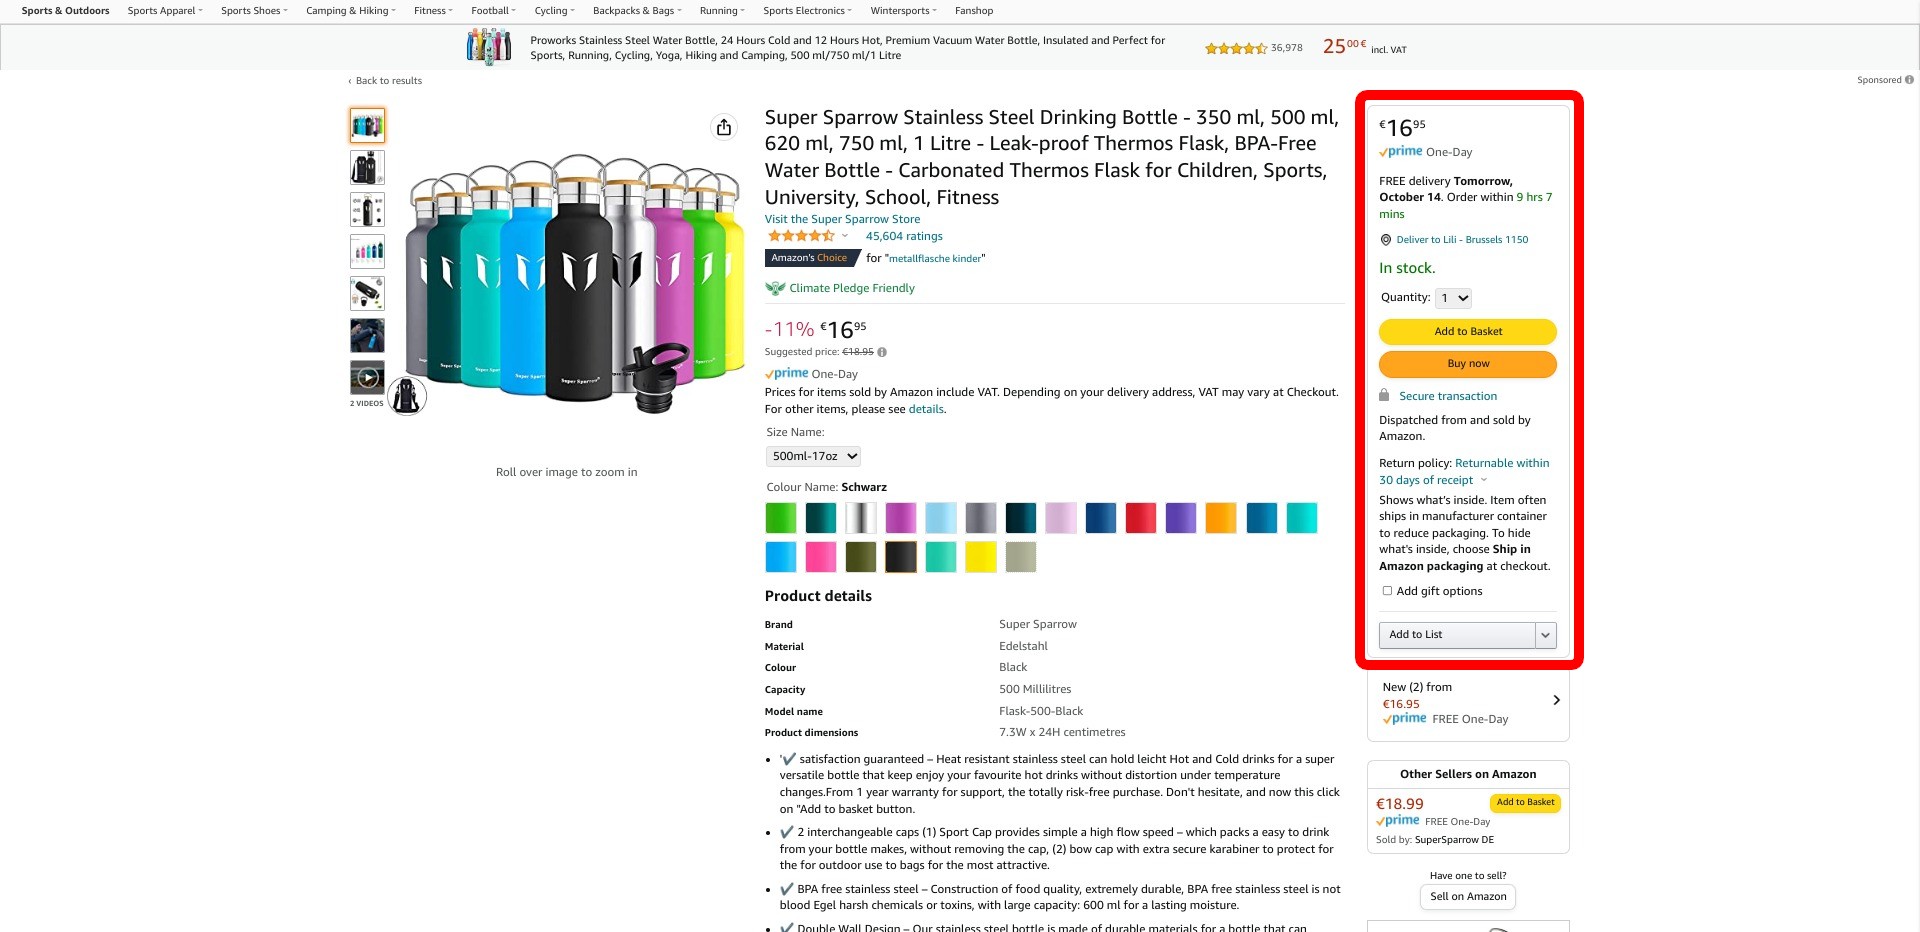 Screenshot of a random listing on amazon.de. The Buy Box is highlighted in red